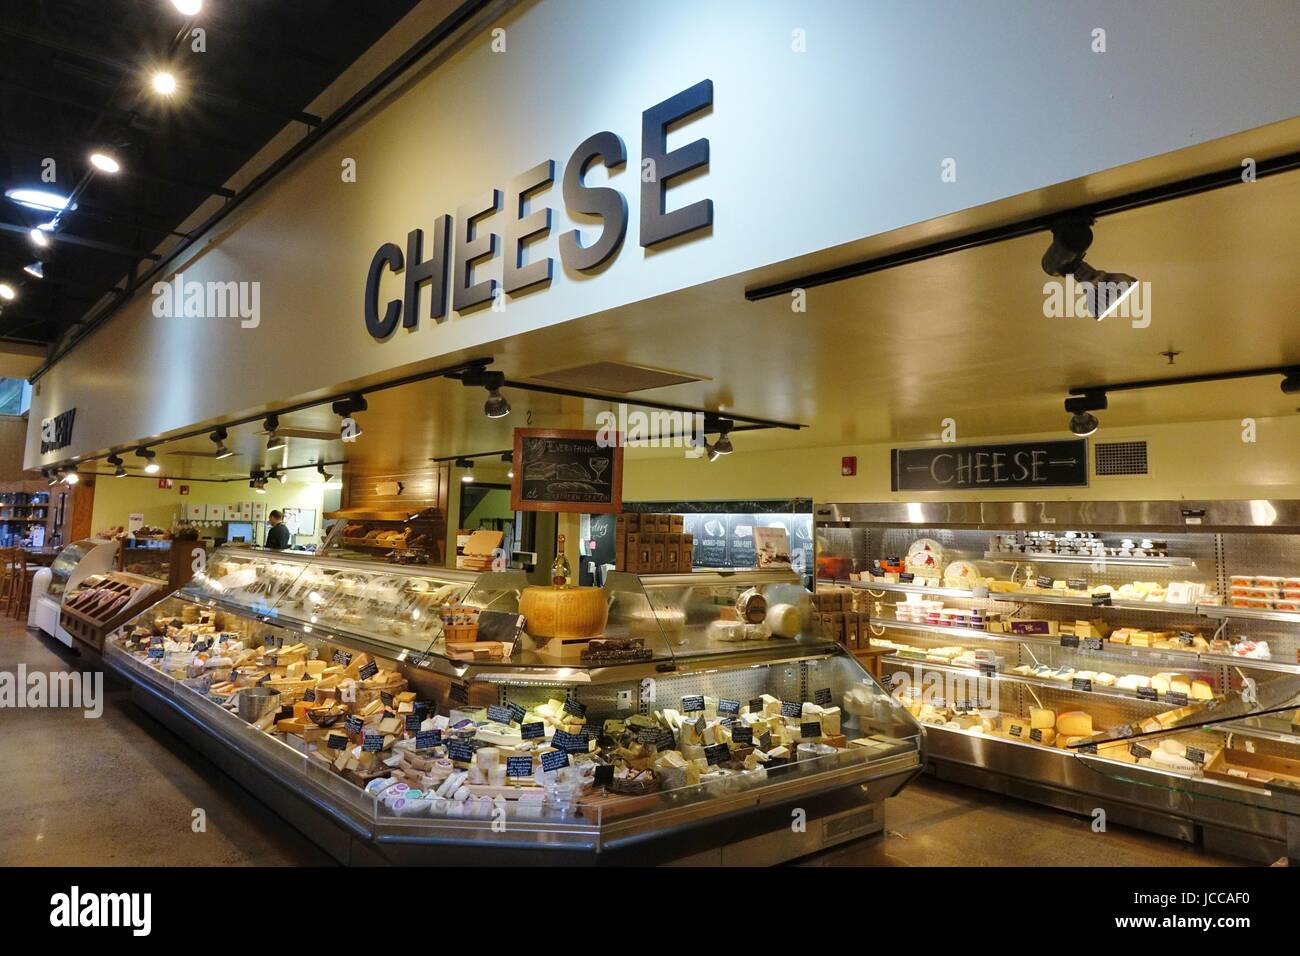 https://c8.alamy.com/comp/JCCAF0/cheese-department-at-southern-season-a-gourmet-grocery-and-food-emporium-JCCAF0.jpg